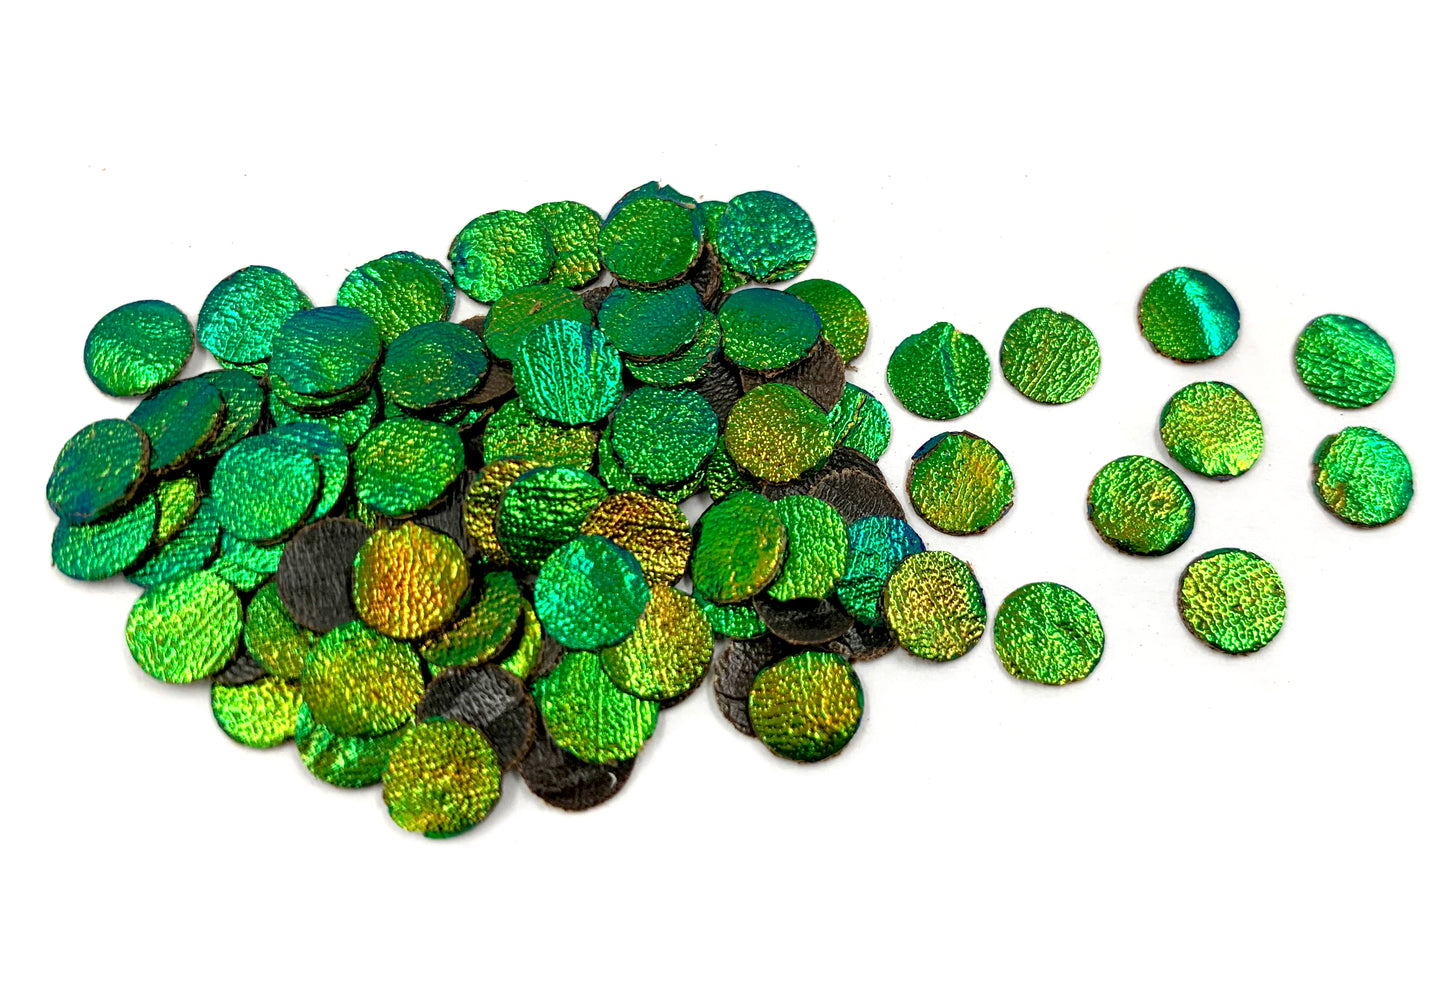 Jewel Beetle Wings UNDRILLED NO-HOLE 100 Pcs Natural Wings - Circle 3 MM